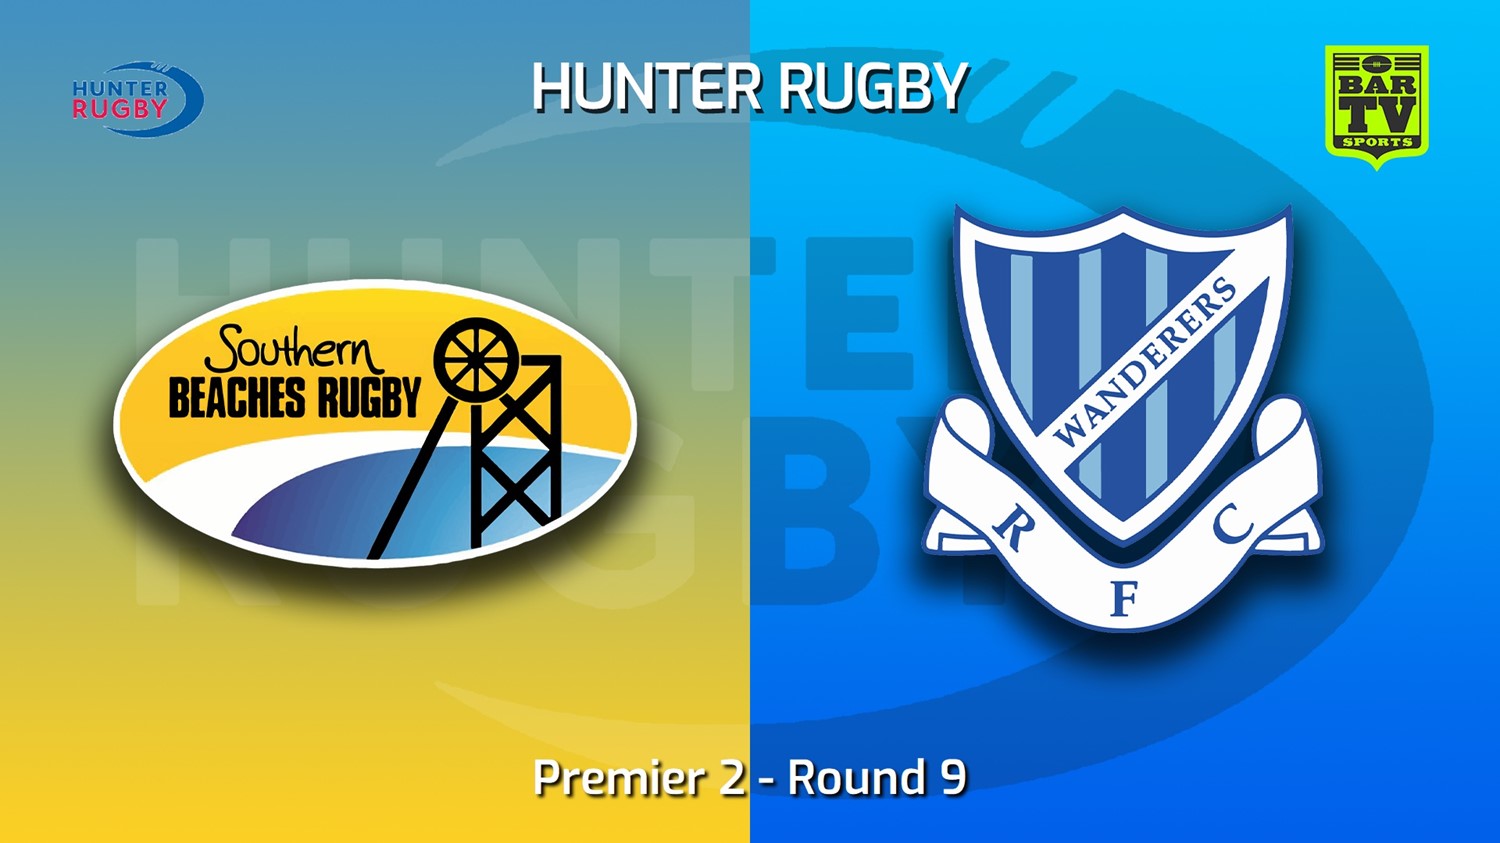 220625-Hunter Rugby Round 9 - Premier 2 - Southern Beaches v Wanderers Slate Image